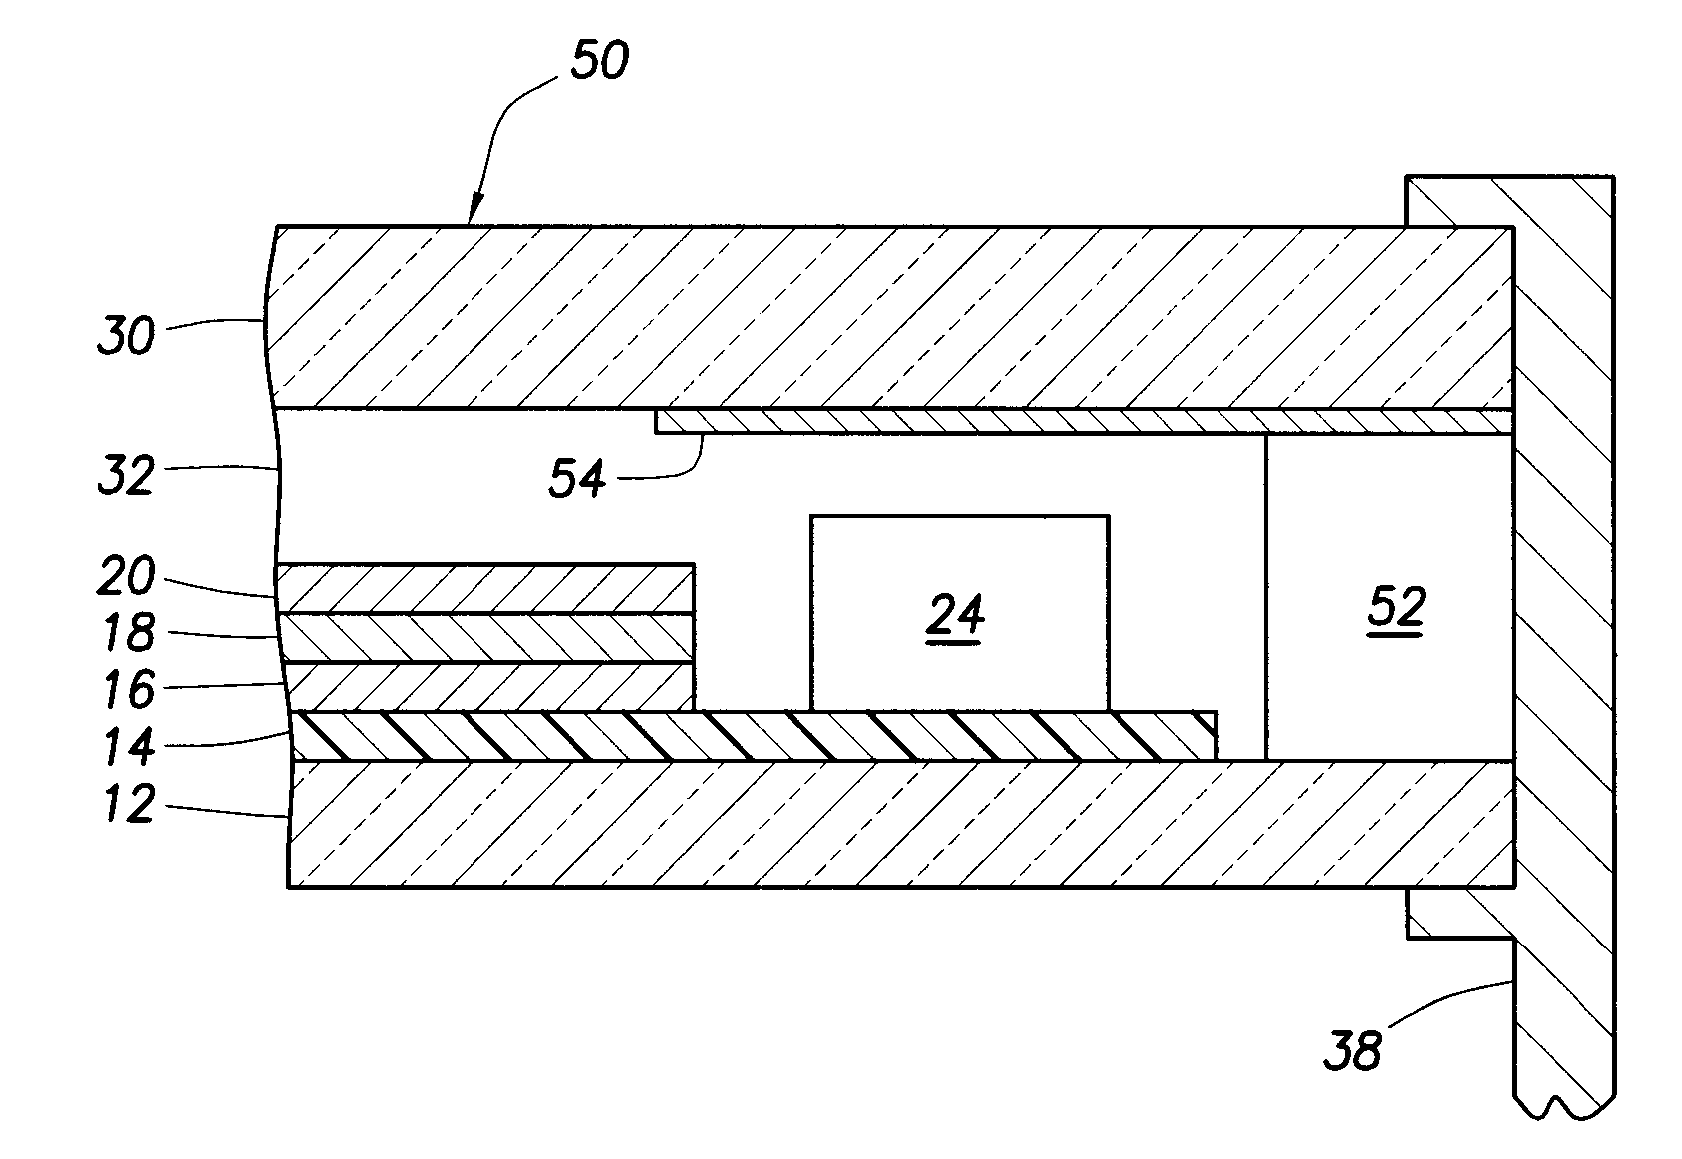 Photovoltaic device and method for encapsulating